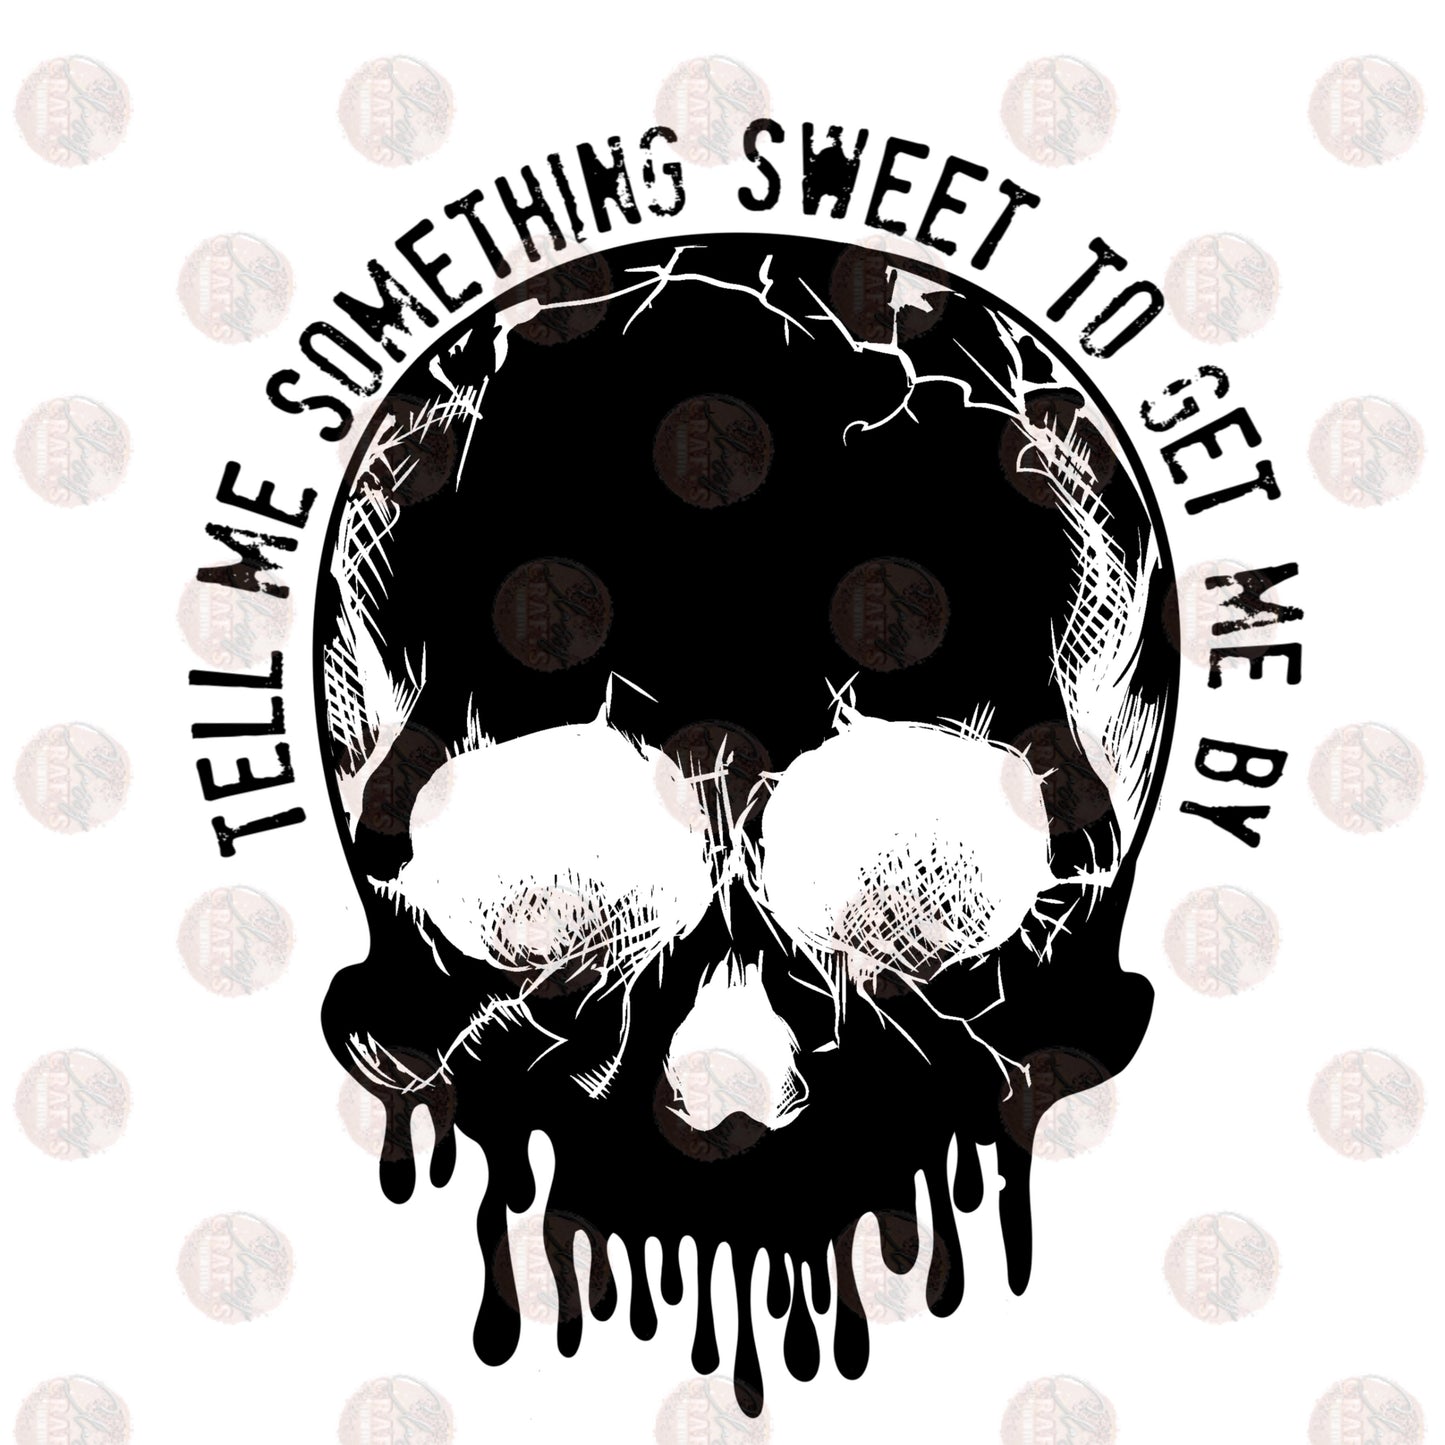 Tell Me Something Sweet - Sublimation Transfer